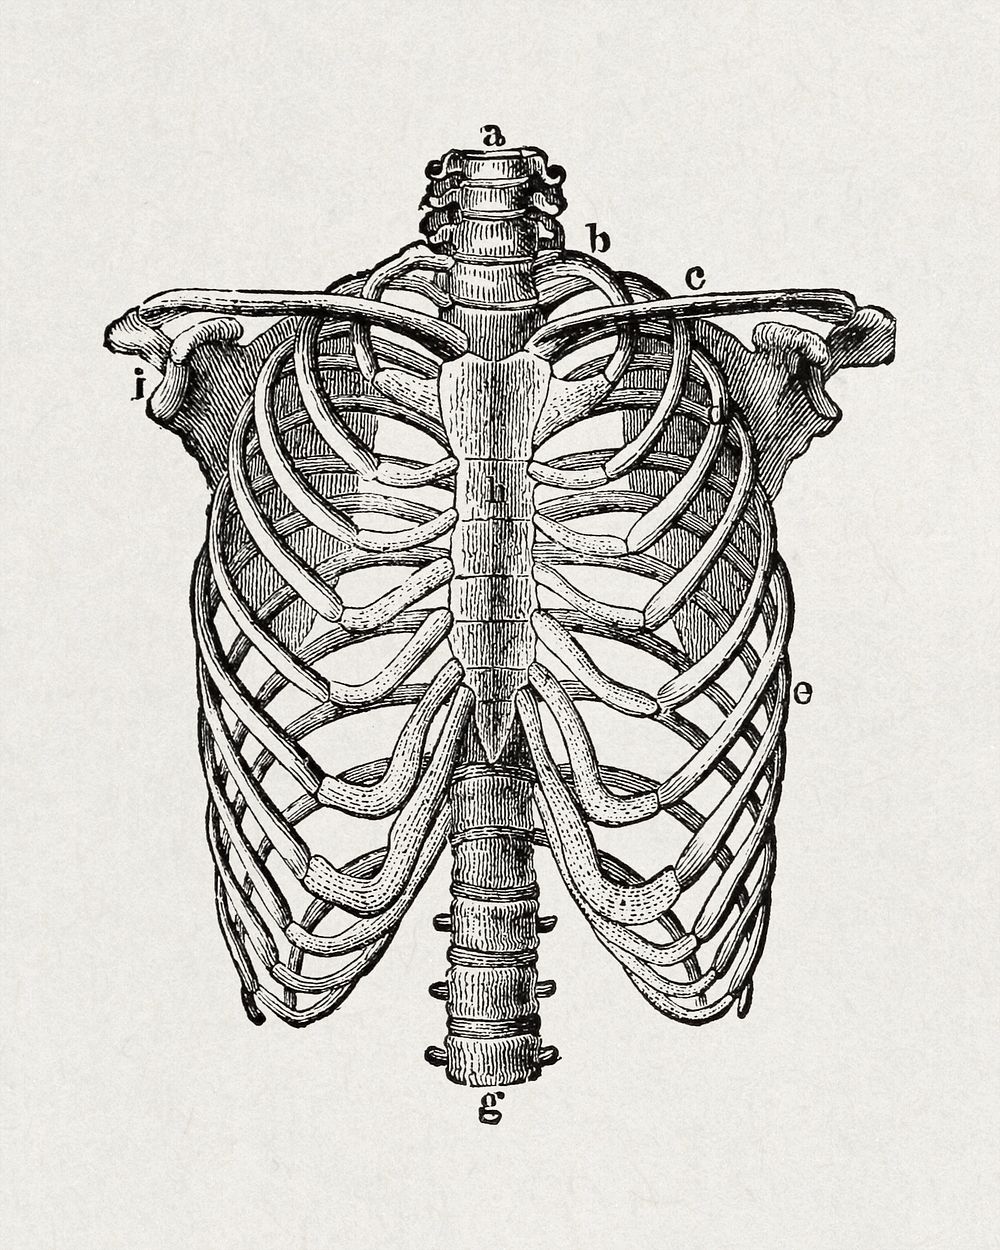 The human body. A beginner's text-book of anatomy, physiology and hygiene (1884), vintage lungs bone illustration. Original…